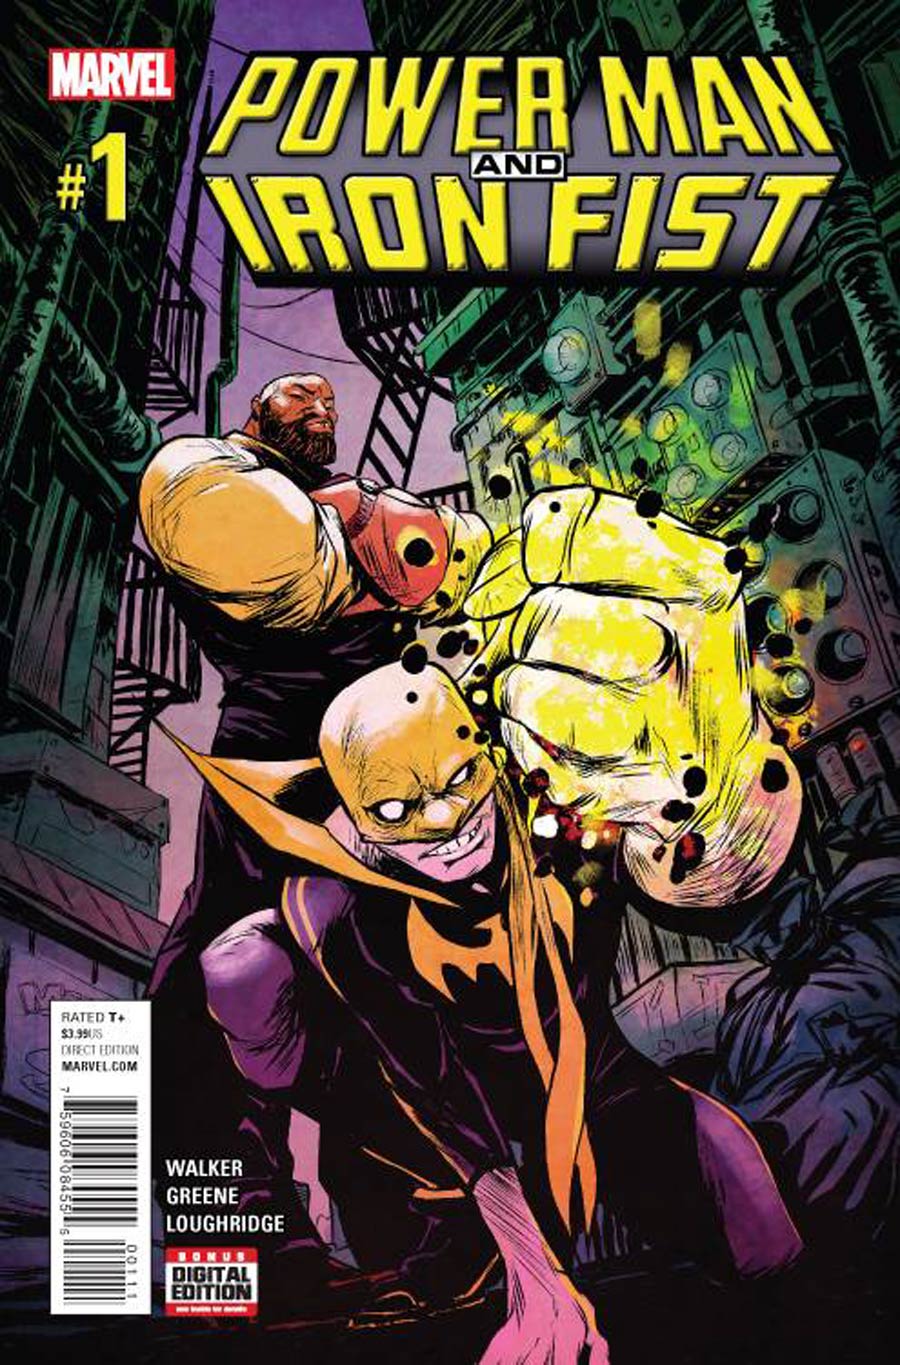 Power Man And Iron Fist Vol 3 #1 Cover A 1st Ptg Regular Sanford Greene Cover